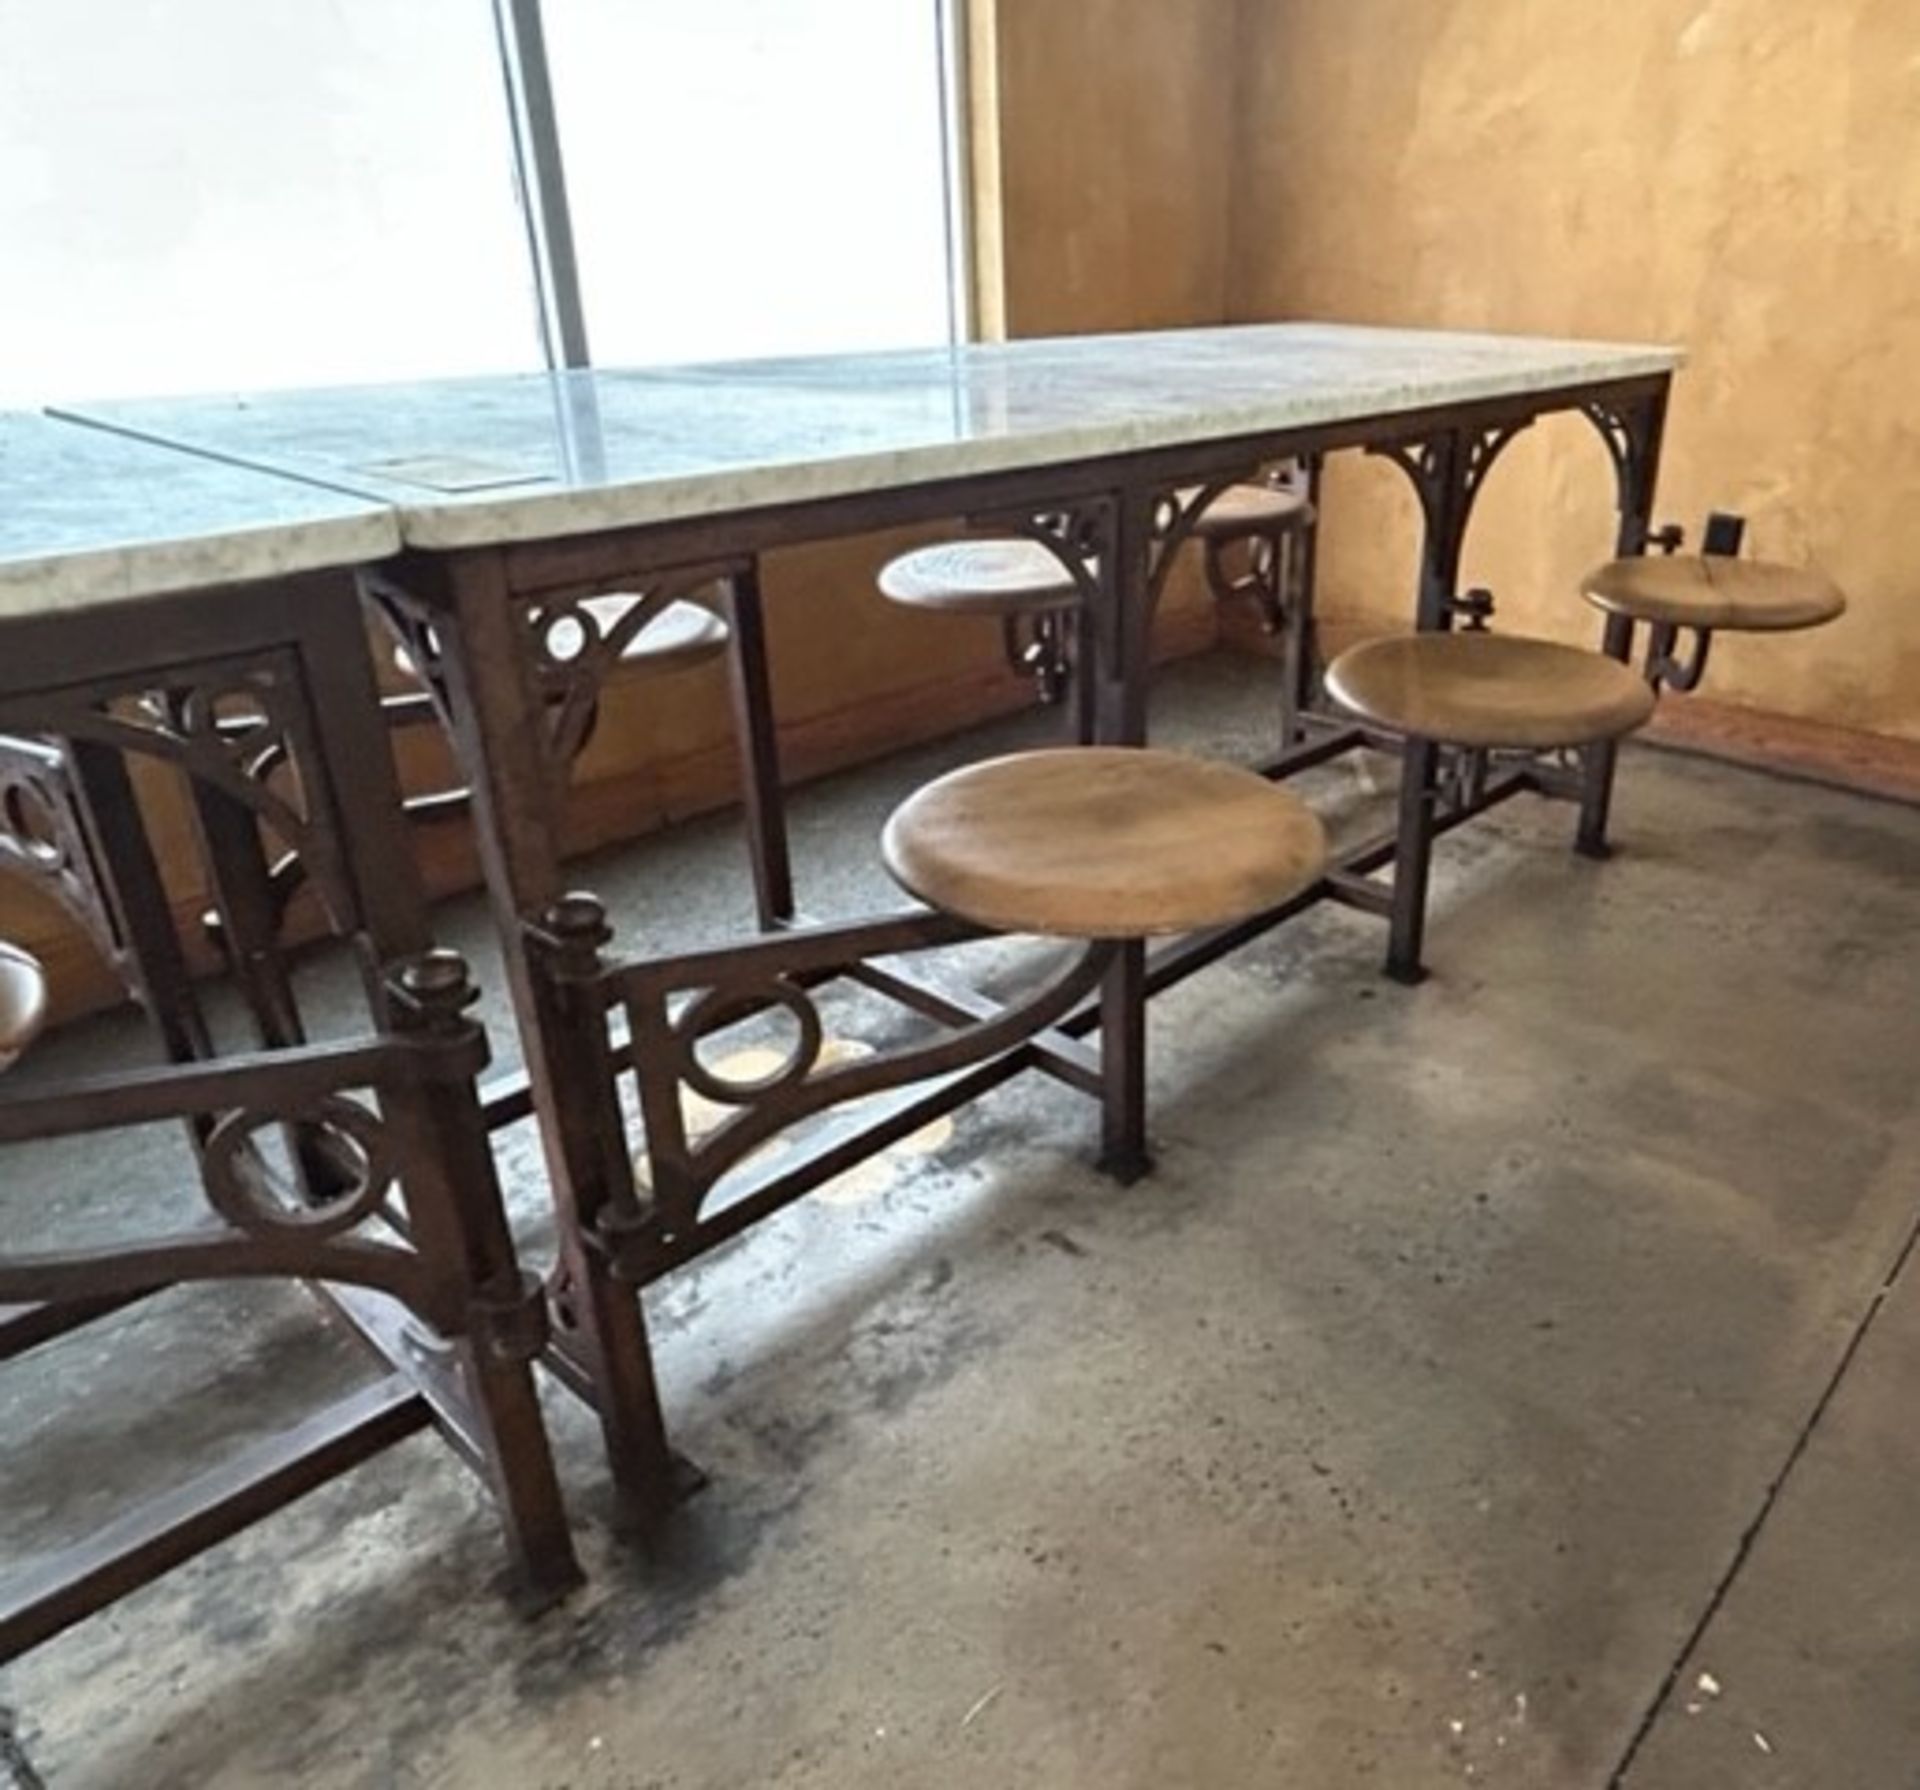 6-Seat Table, Metal Frame, Marble Top, 6-Swing Out Chairs, 32" x 83" x 36" - Image 3 of 4